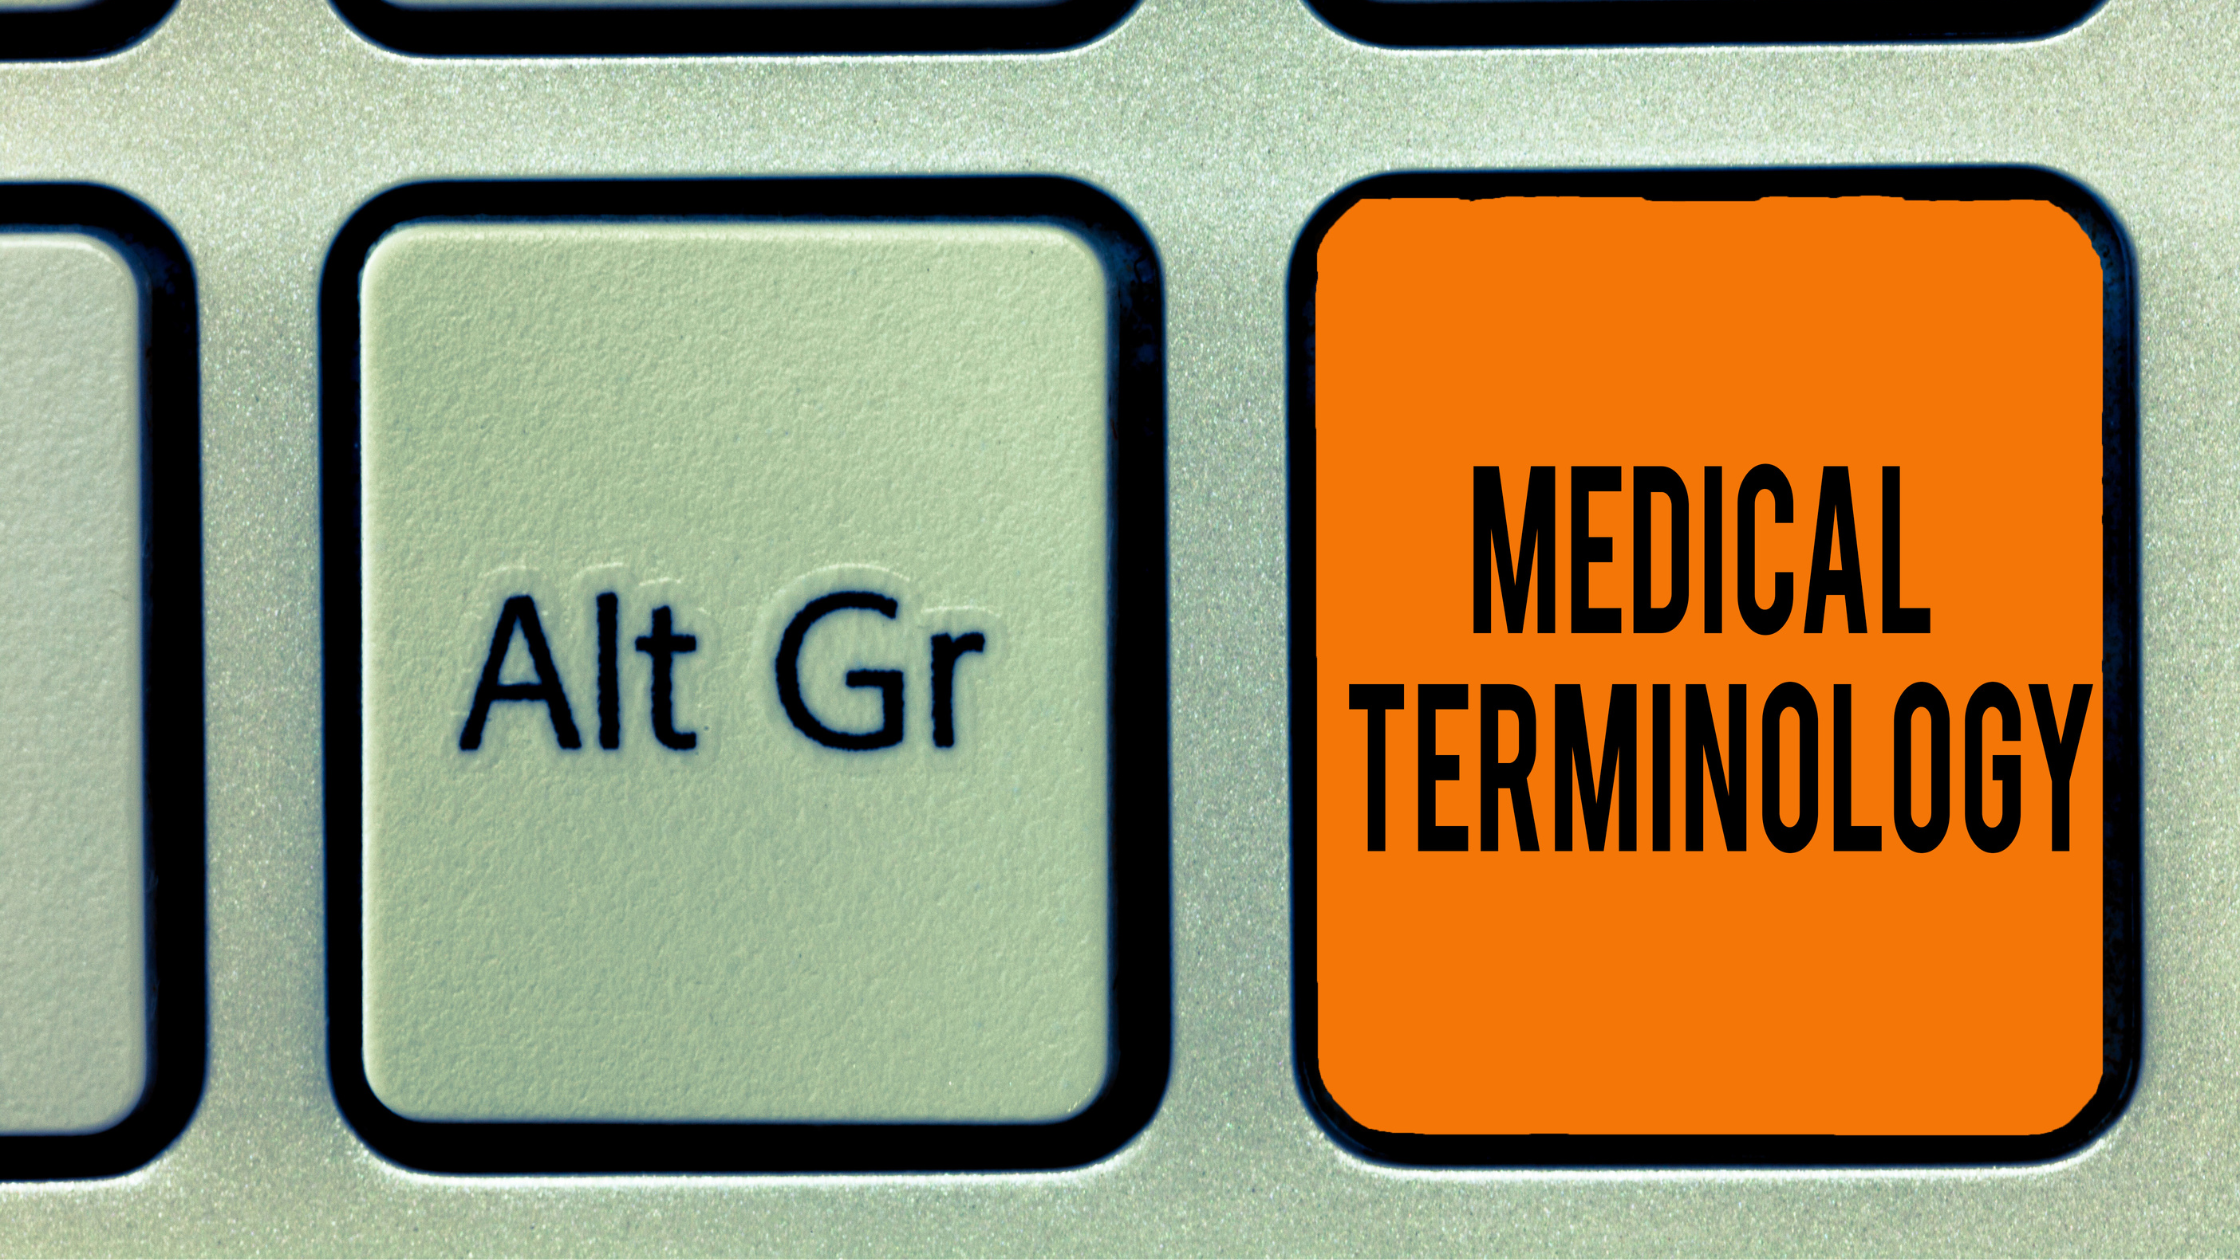 An image showing a key on a keyboard boldly announcing Medical terminology as a tip for managing personal injury cases.